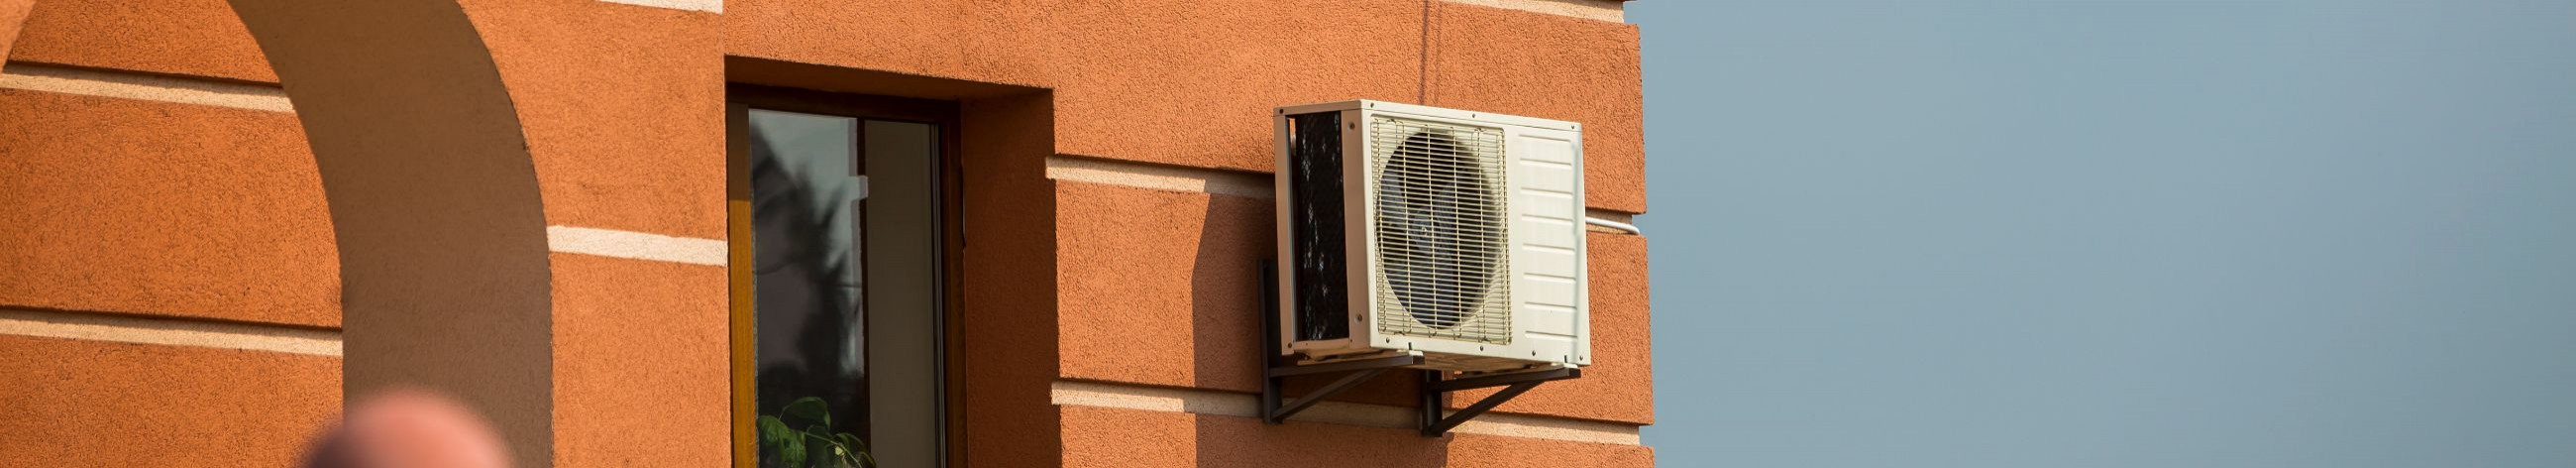 cooling and air conditioning systems, installation of split systems, maintenance and repair of air conditioners, air conditioning installation:, heating equipment configuration, air conditioning repair, air conditioning maintenance, air conditioning installation, heat pumps, cooling and air conditioning systems, heat pumps